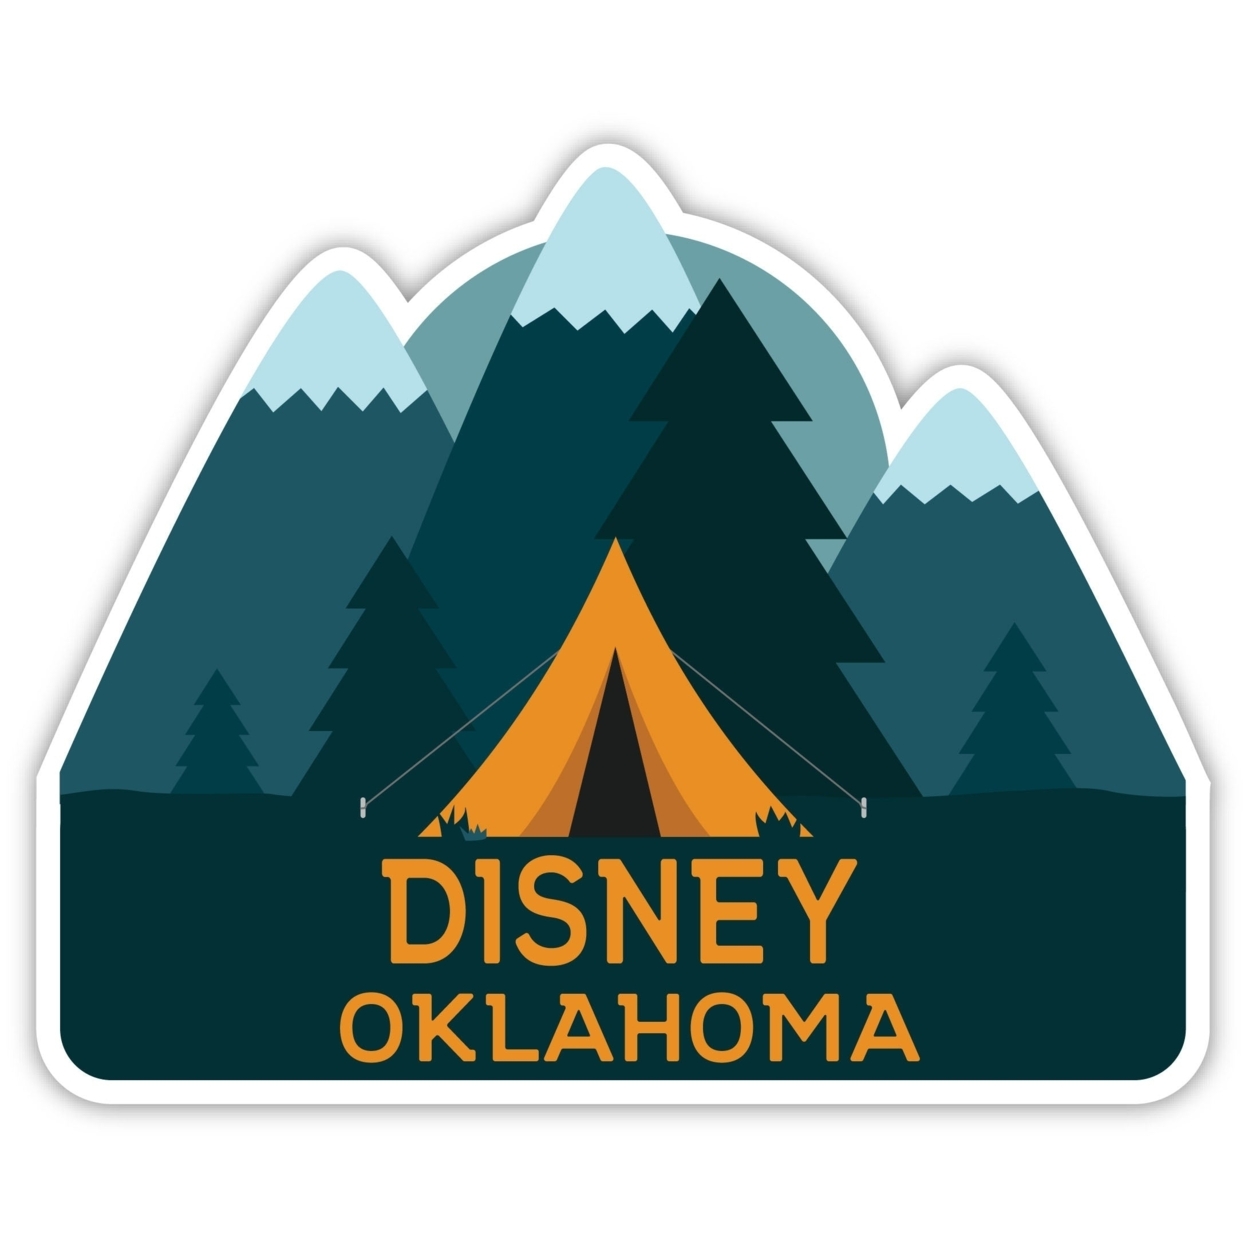 Disney Oklahoma Souvenir Decorative Stickers (Choose Theme And Size) - 4-Pack, 8-Inch, Tent